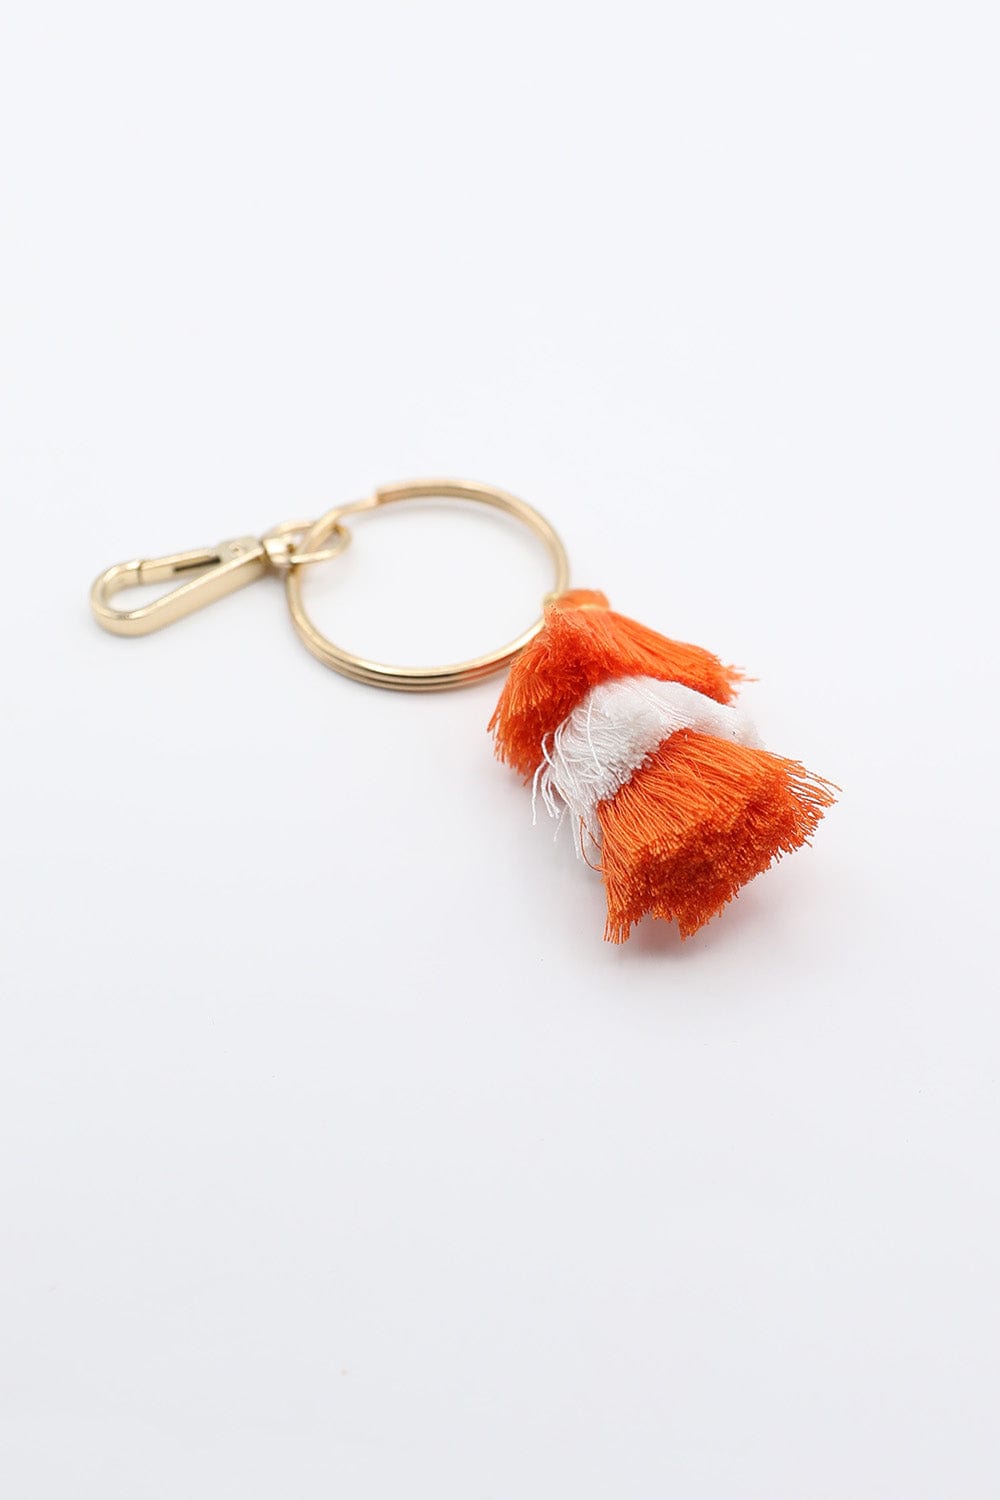 Orange and White Tassel Keychain on Large Ring with Hook